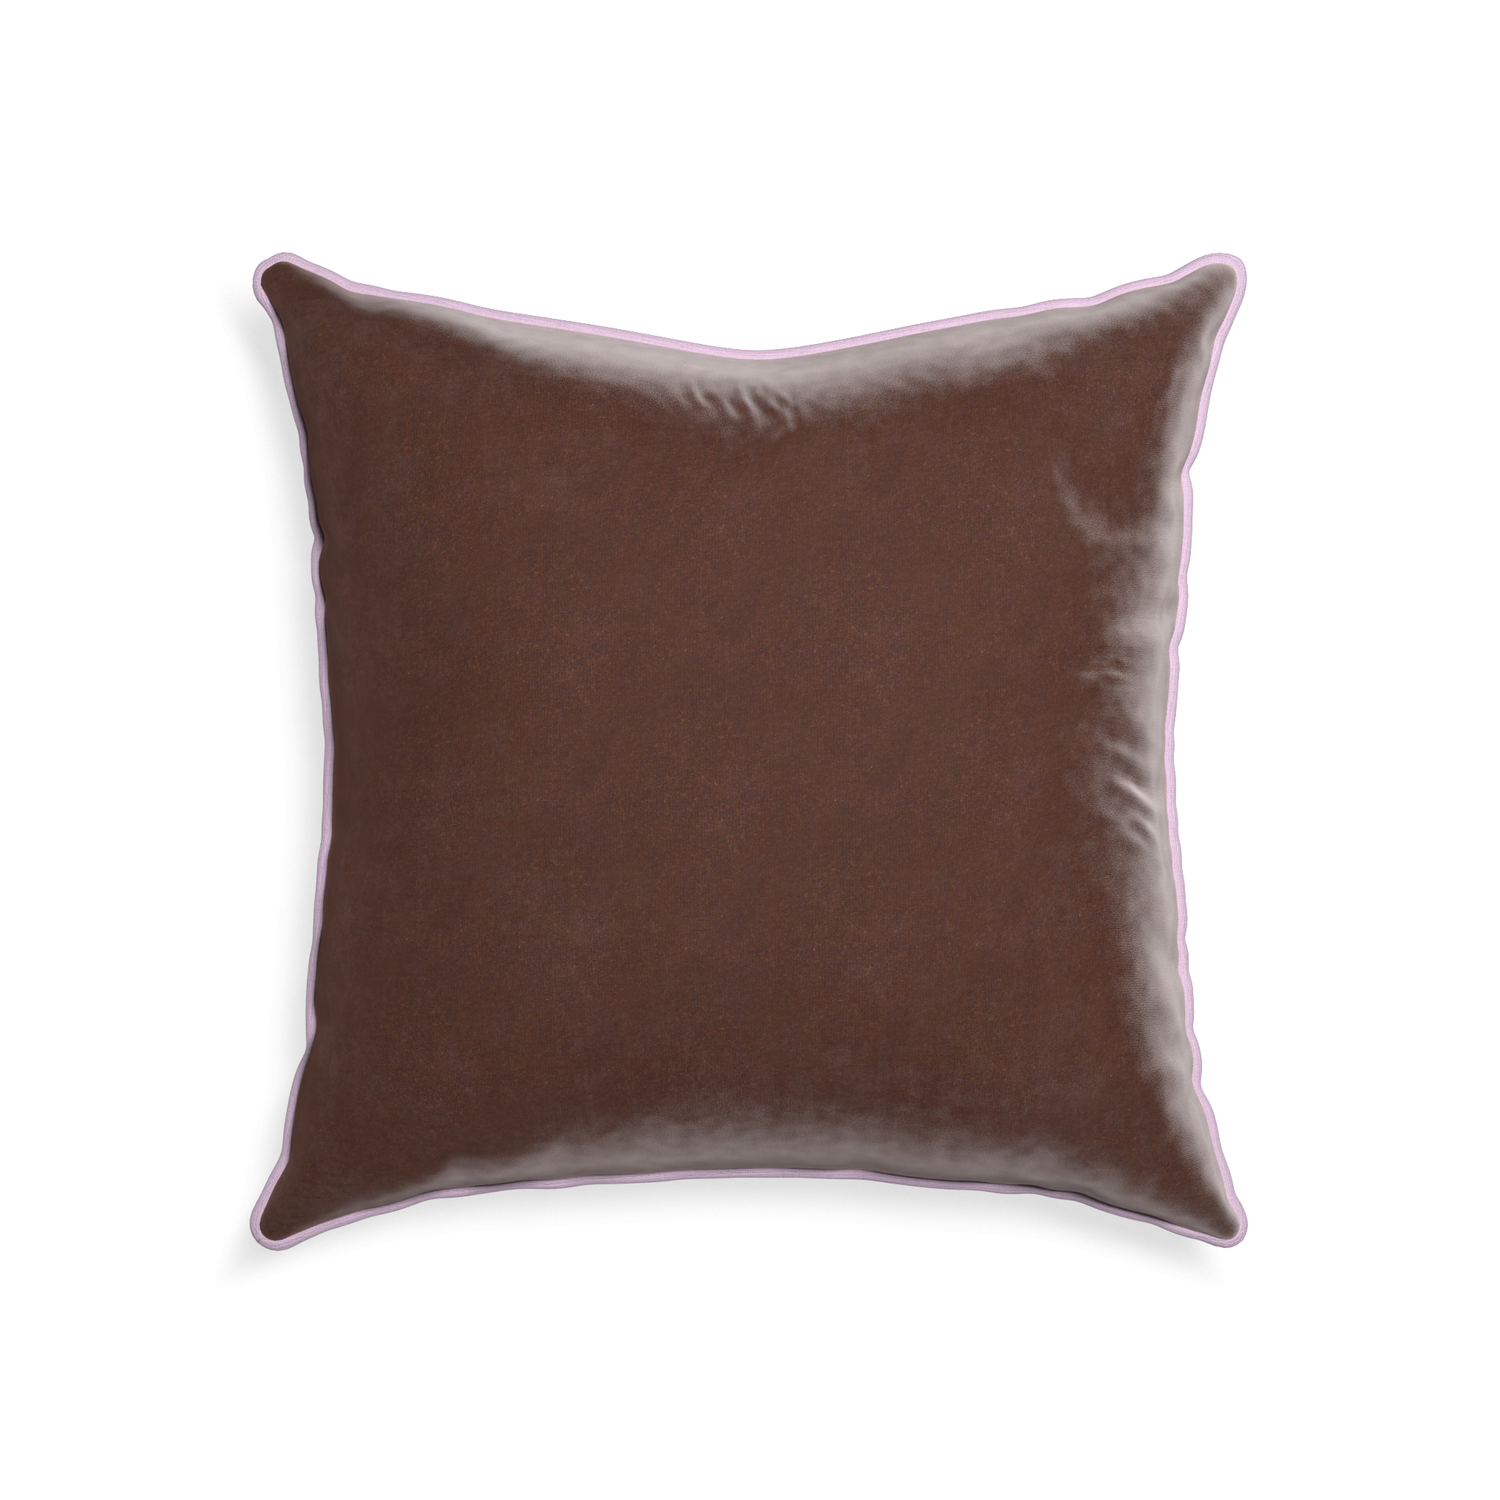 22-square walnut velvet custom pillow with l piping on white background